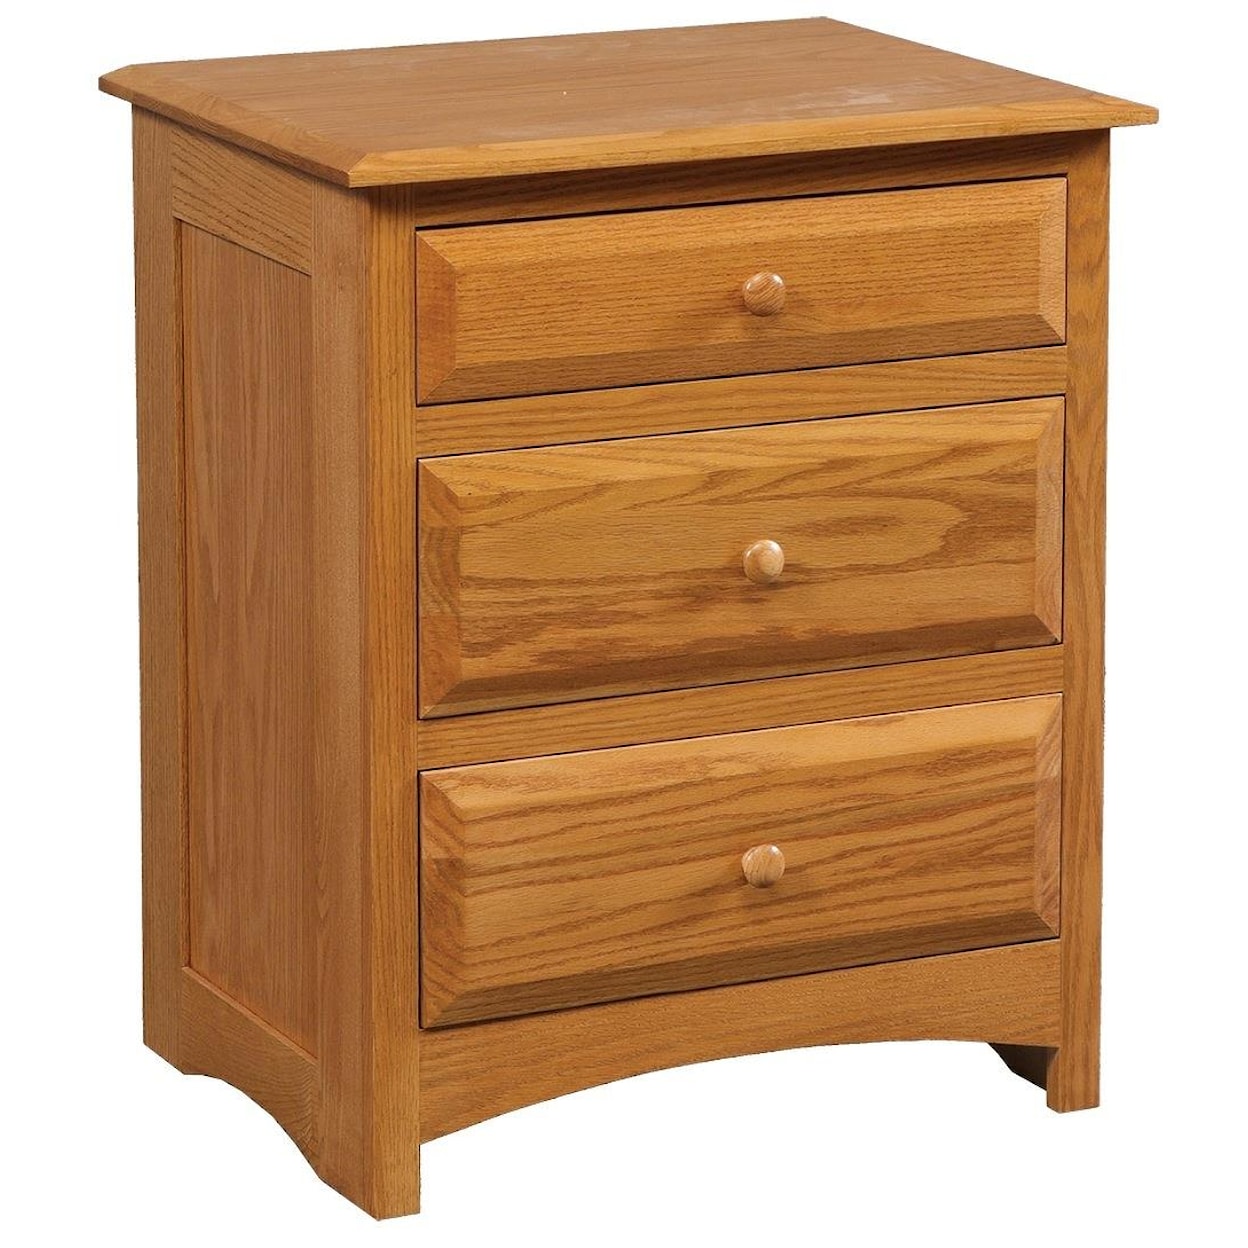 Daniels Amish Simplicity 3-Drawer Nightstand